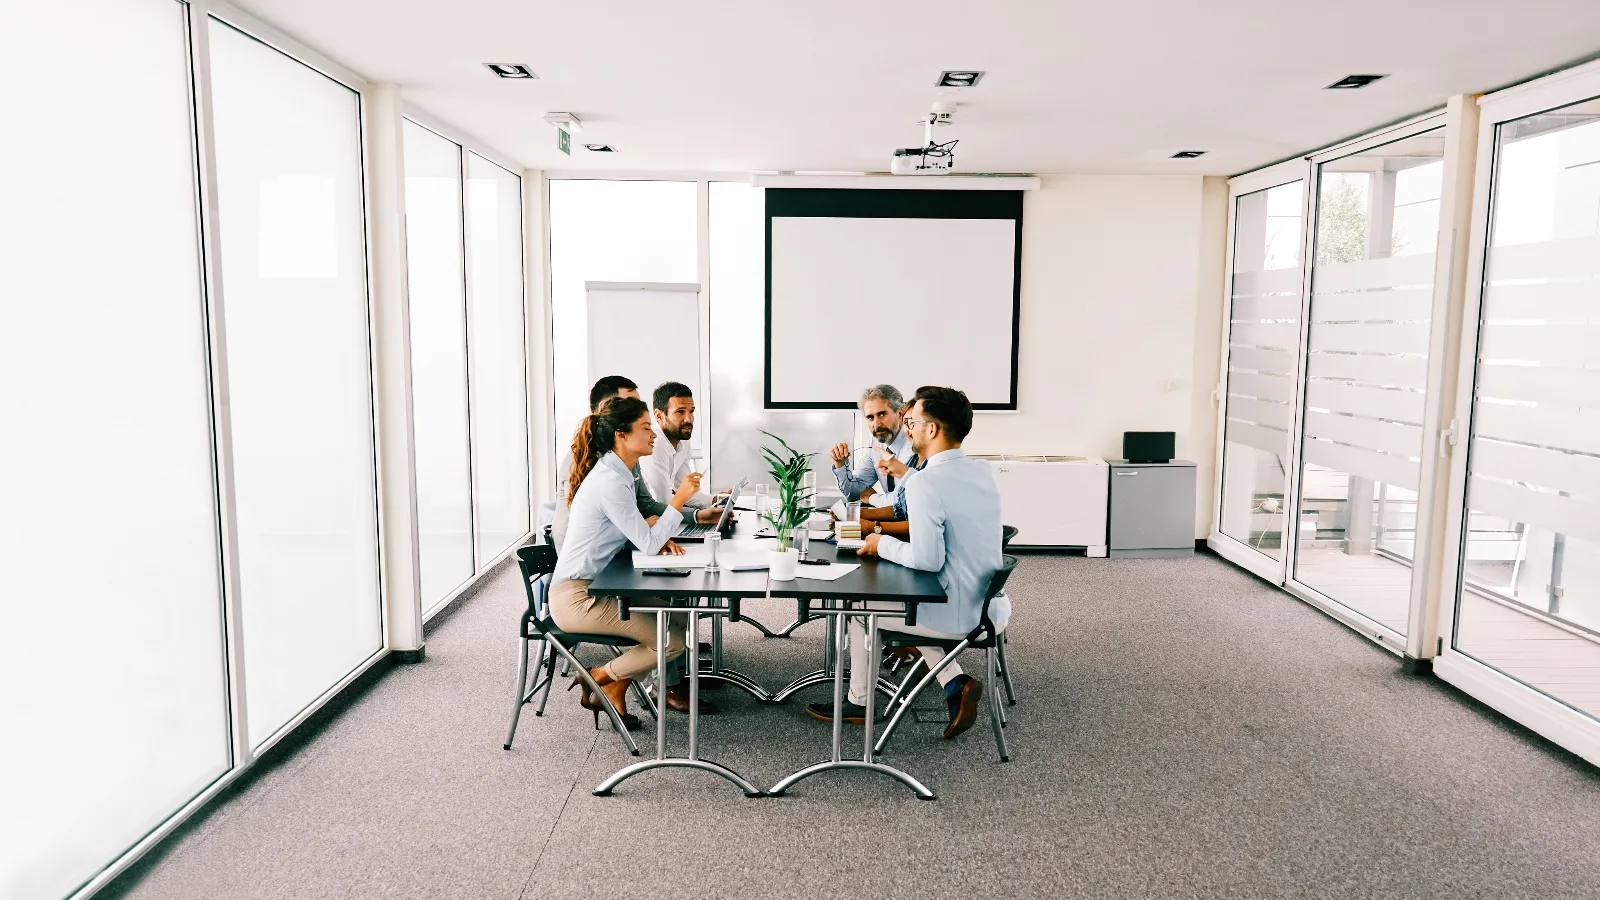 Photo of a work team sitting at a conference table having a discussion.